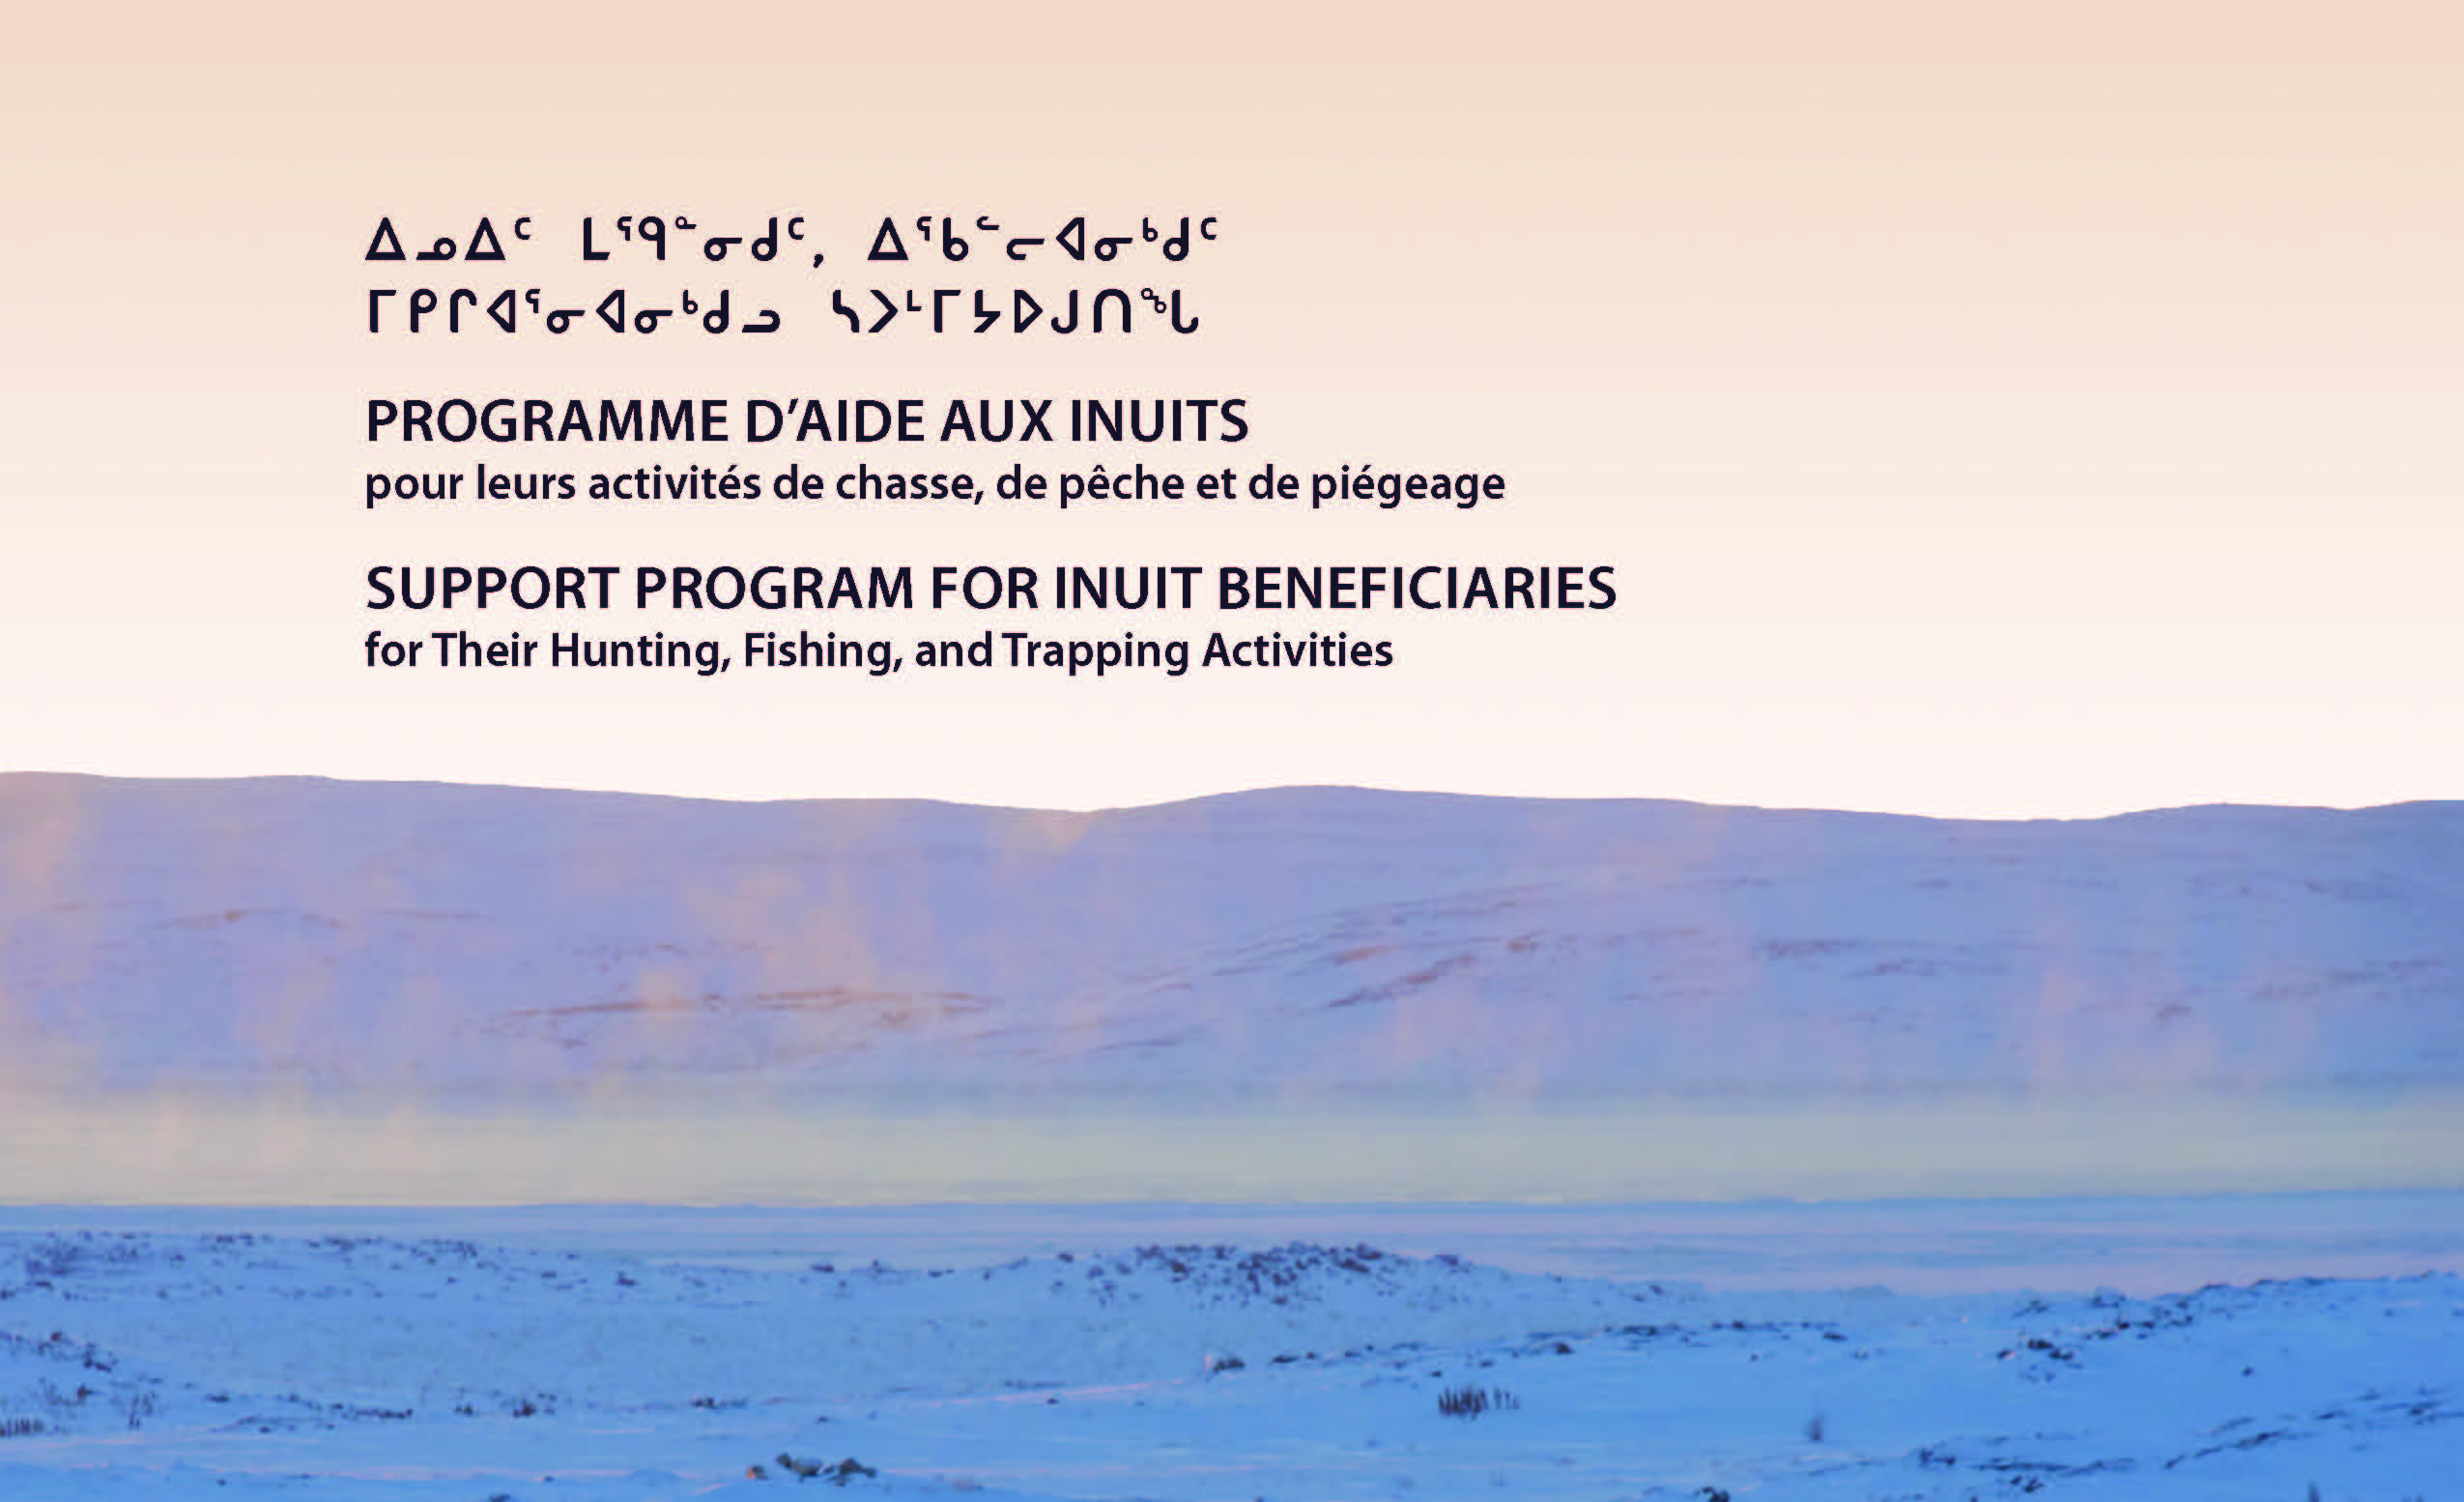 2018 Annual Report: Support Program for Inuit Beneficiaries for their Hunting, Fishing, and Trapping Activities